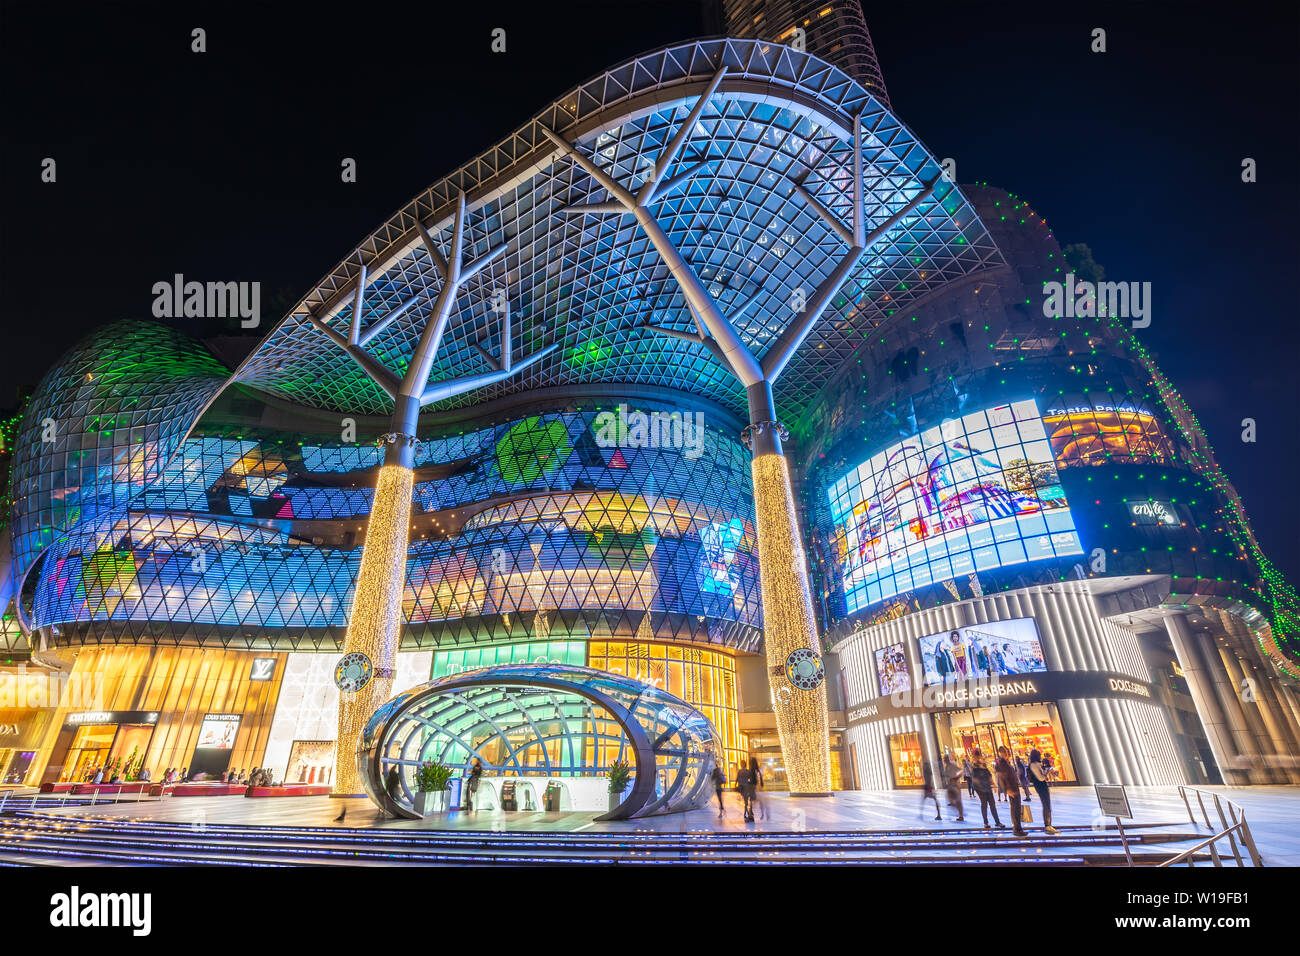 ORCHARD ROAD, SINGAPOUR - 6 janvier 2019 : Singapour nuit ville skyline at ion Orchard shopping mall Banque D'Images